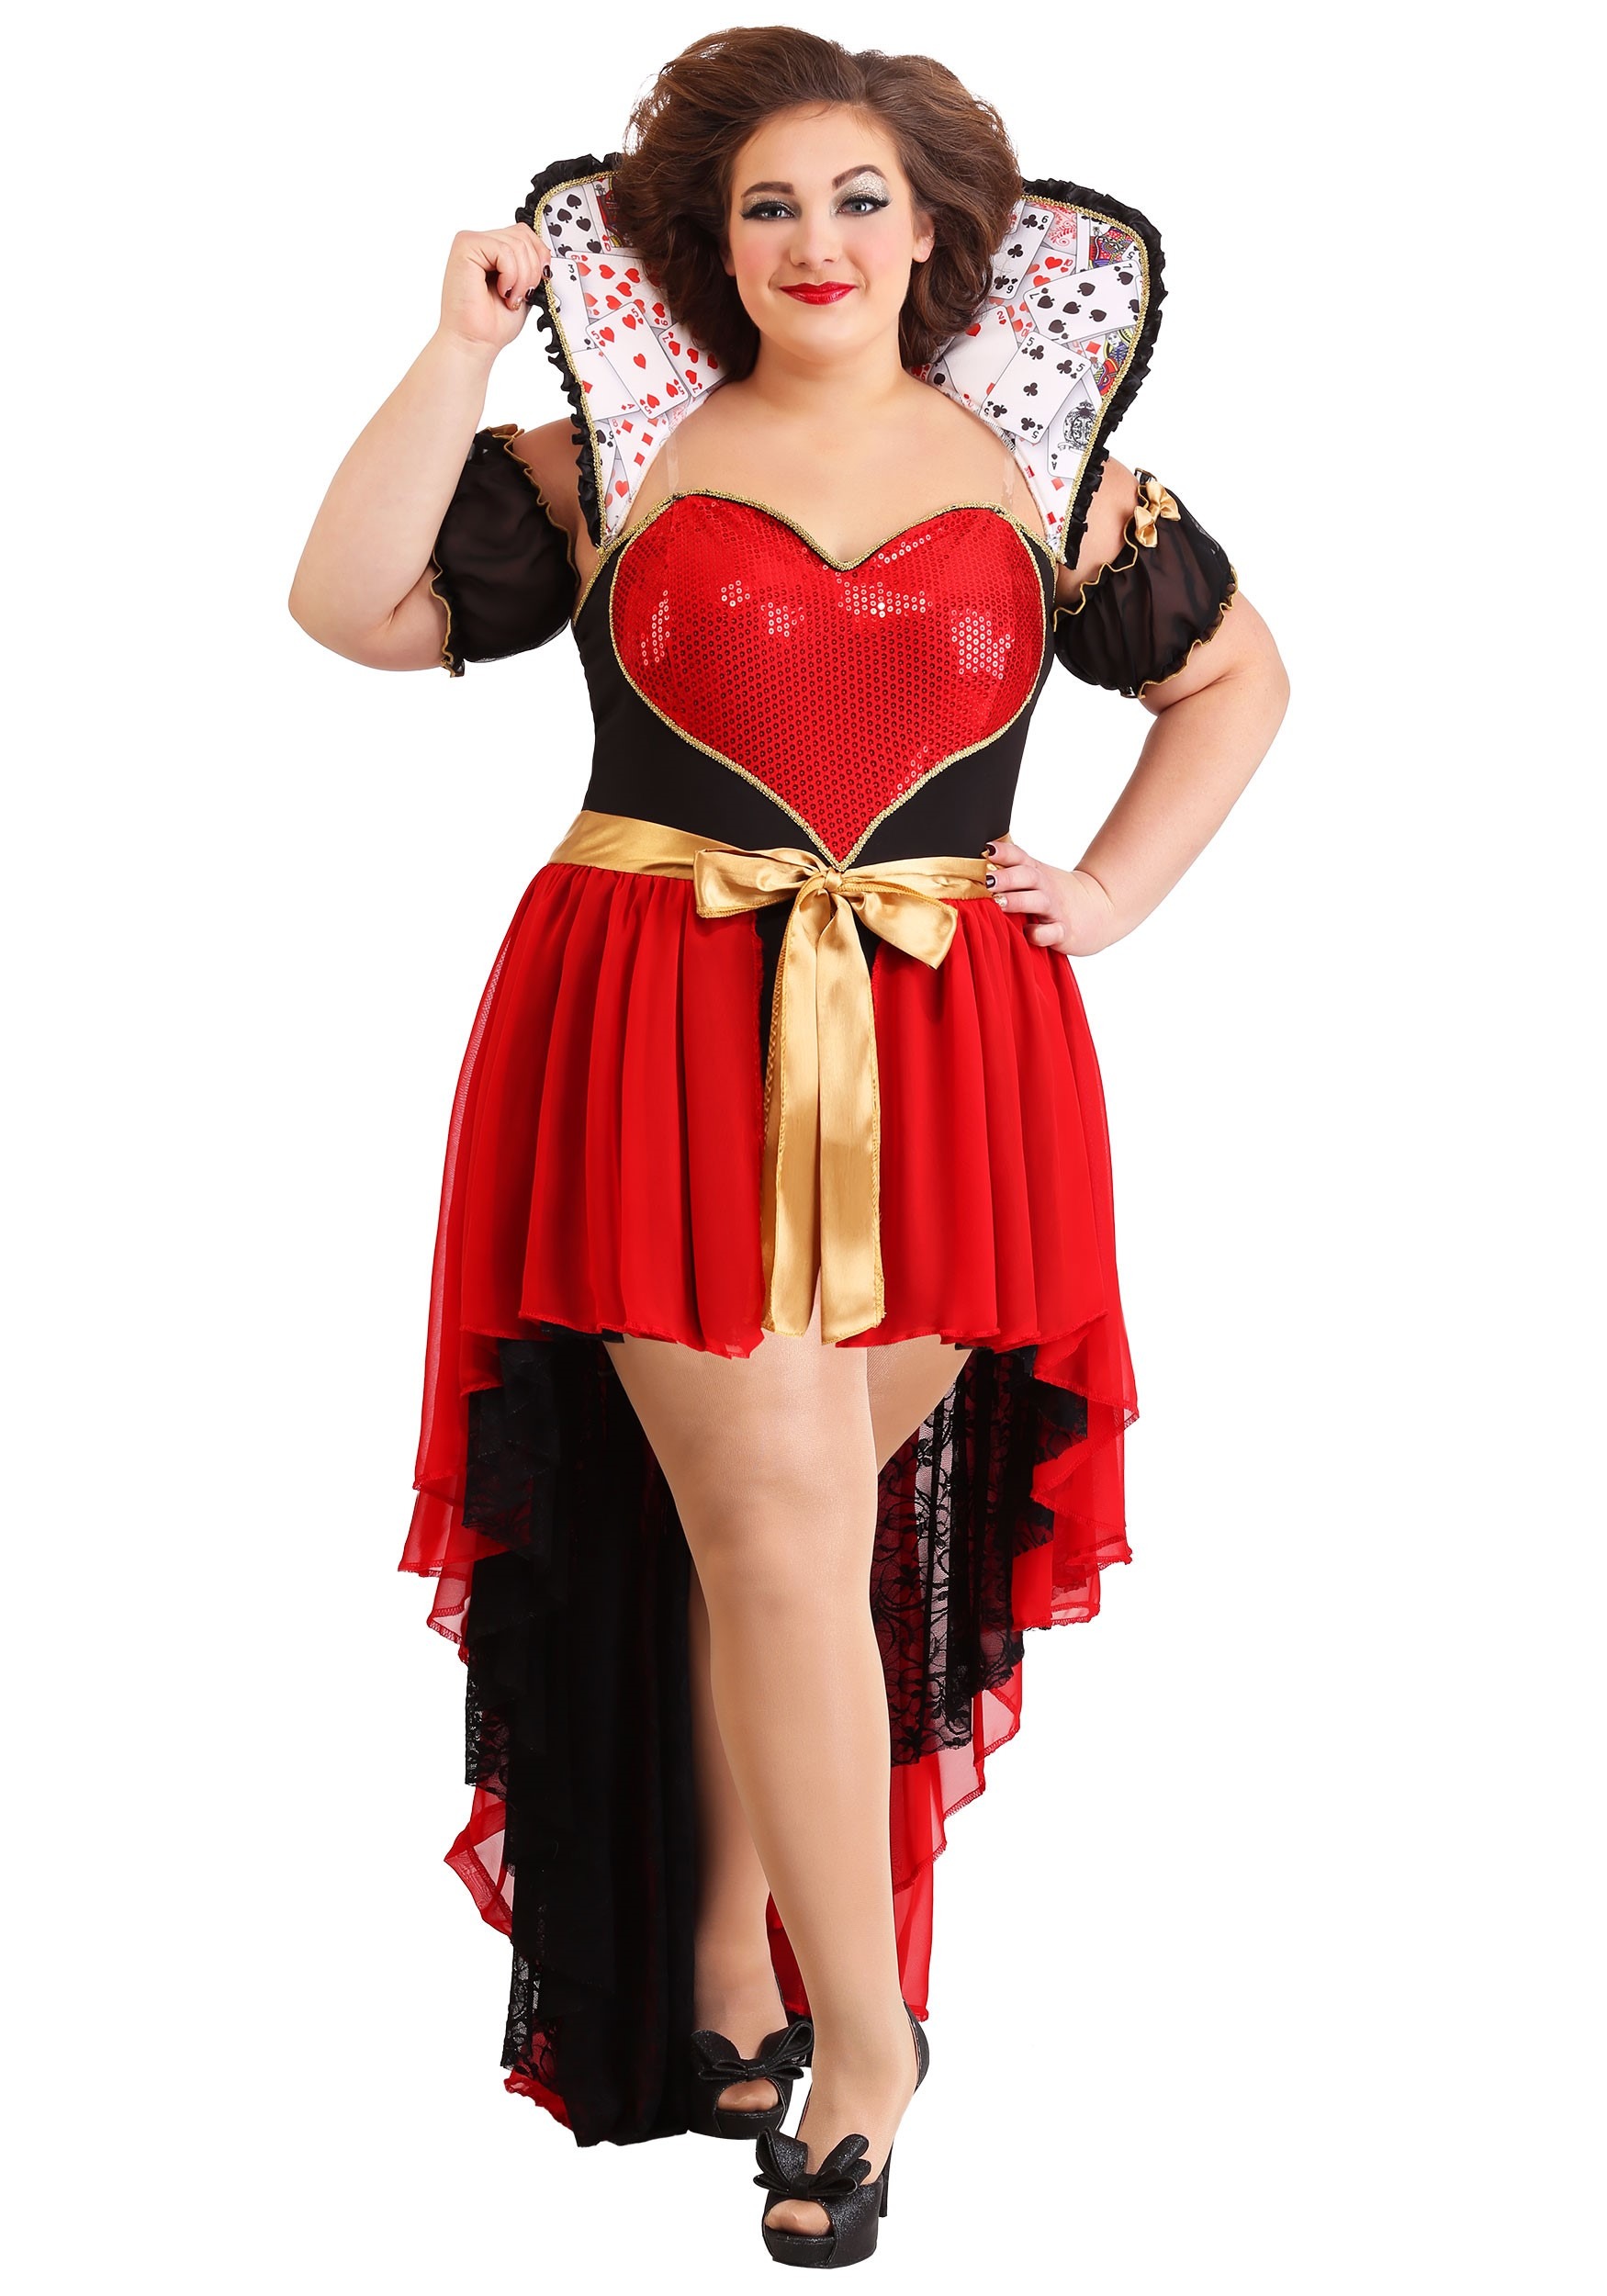 Photos - Fancy Dress FUN Costumes Plus Size Sparkling Queen of Hearts Costume for Women Black&#